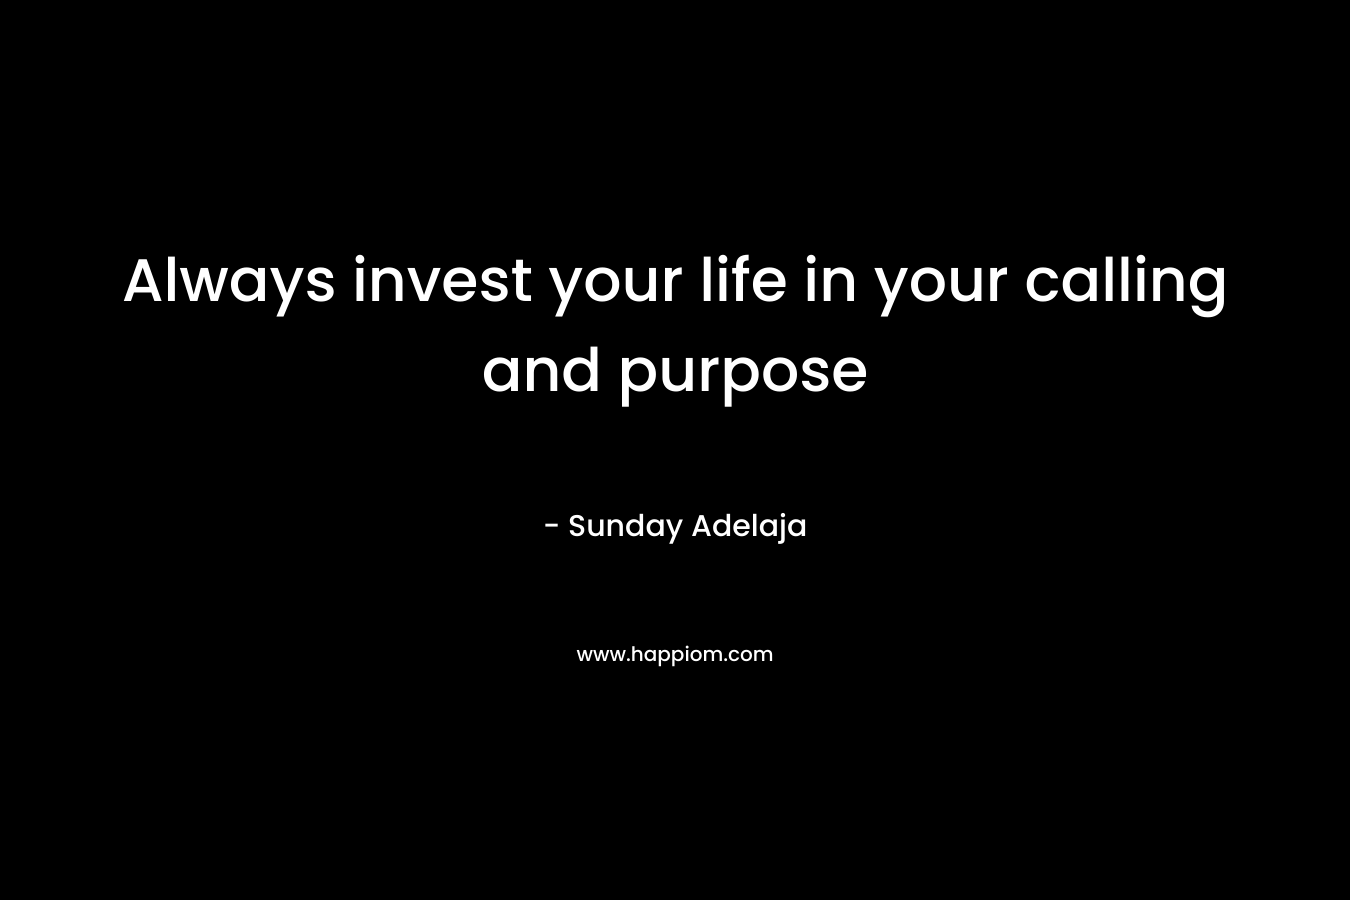 Always invest your life in your calling and purpose